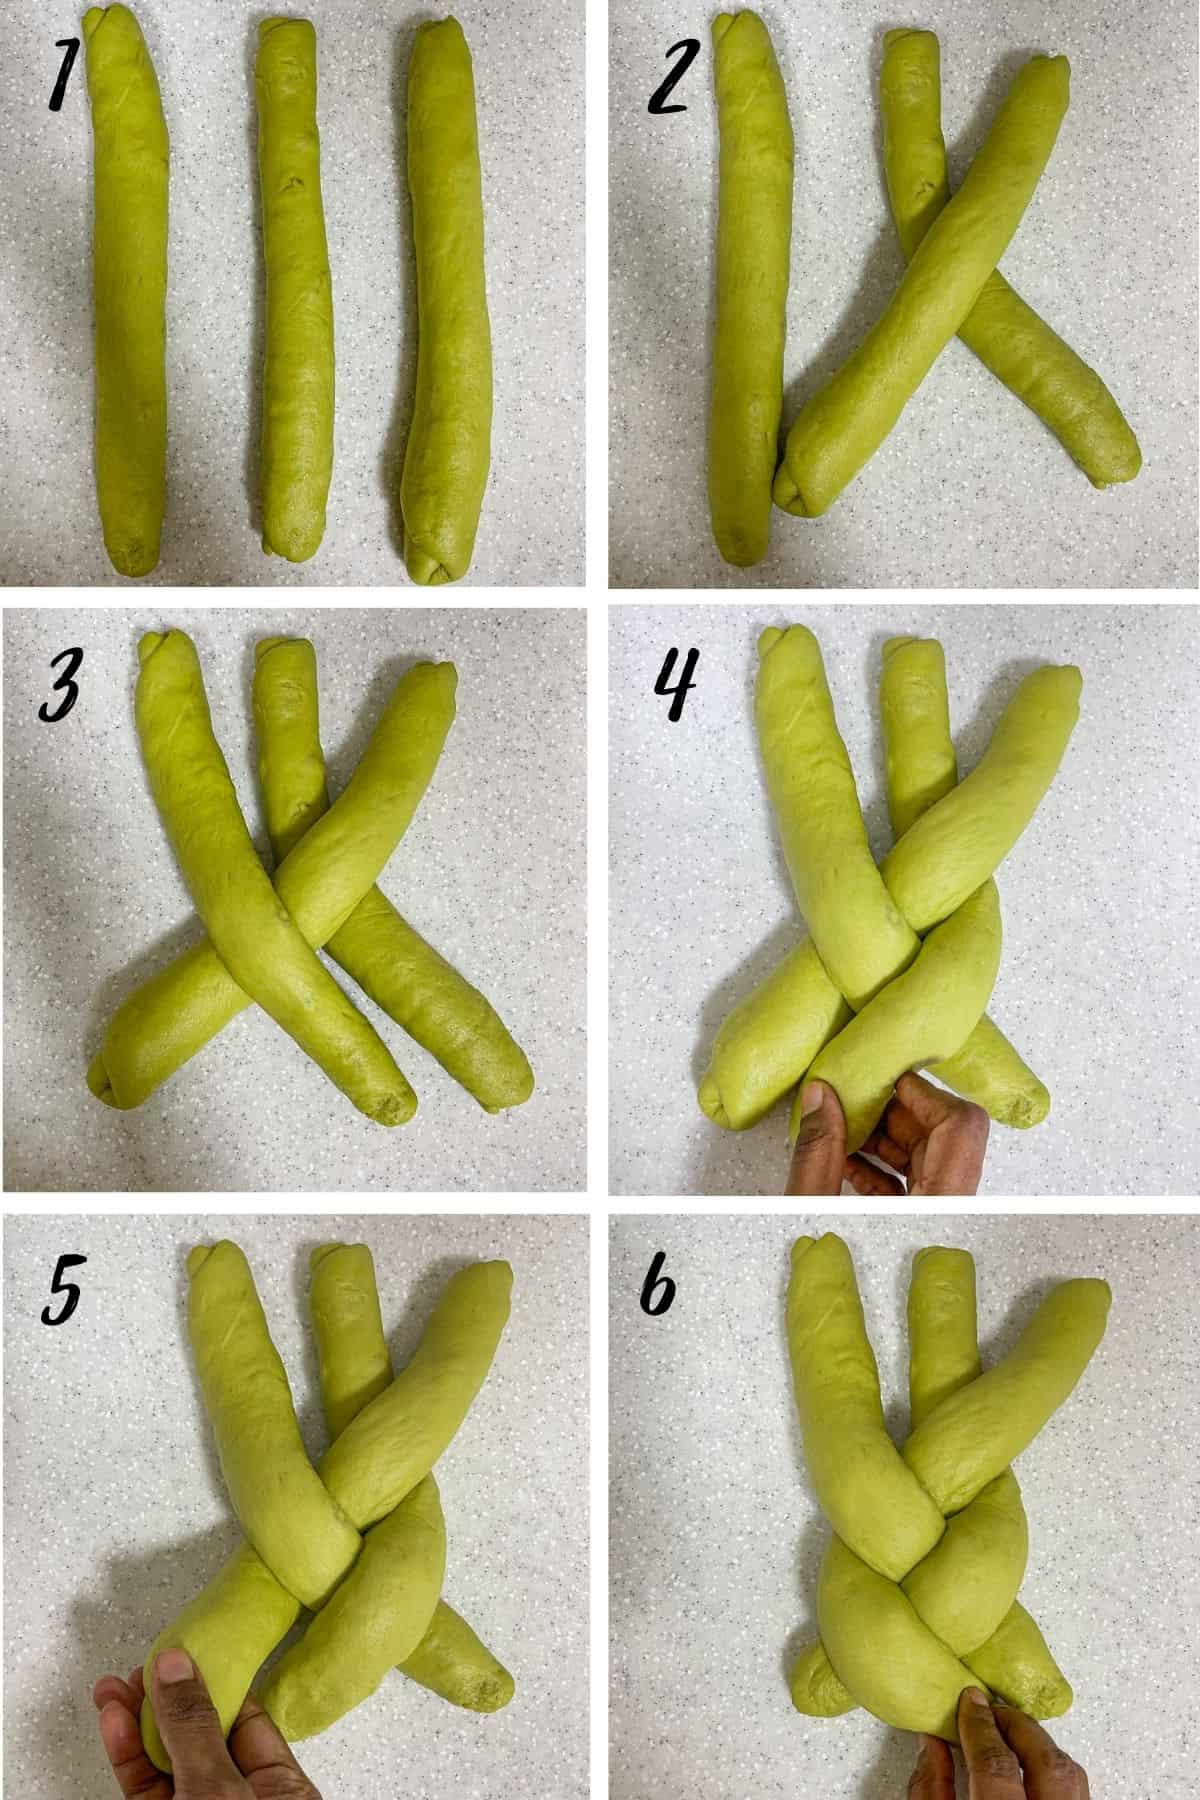 A poster of 6 images showing how to make a braid loaf.